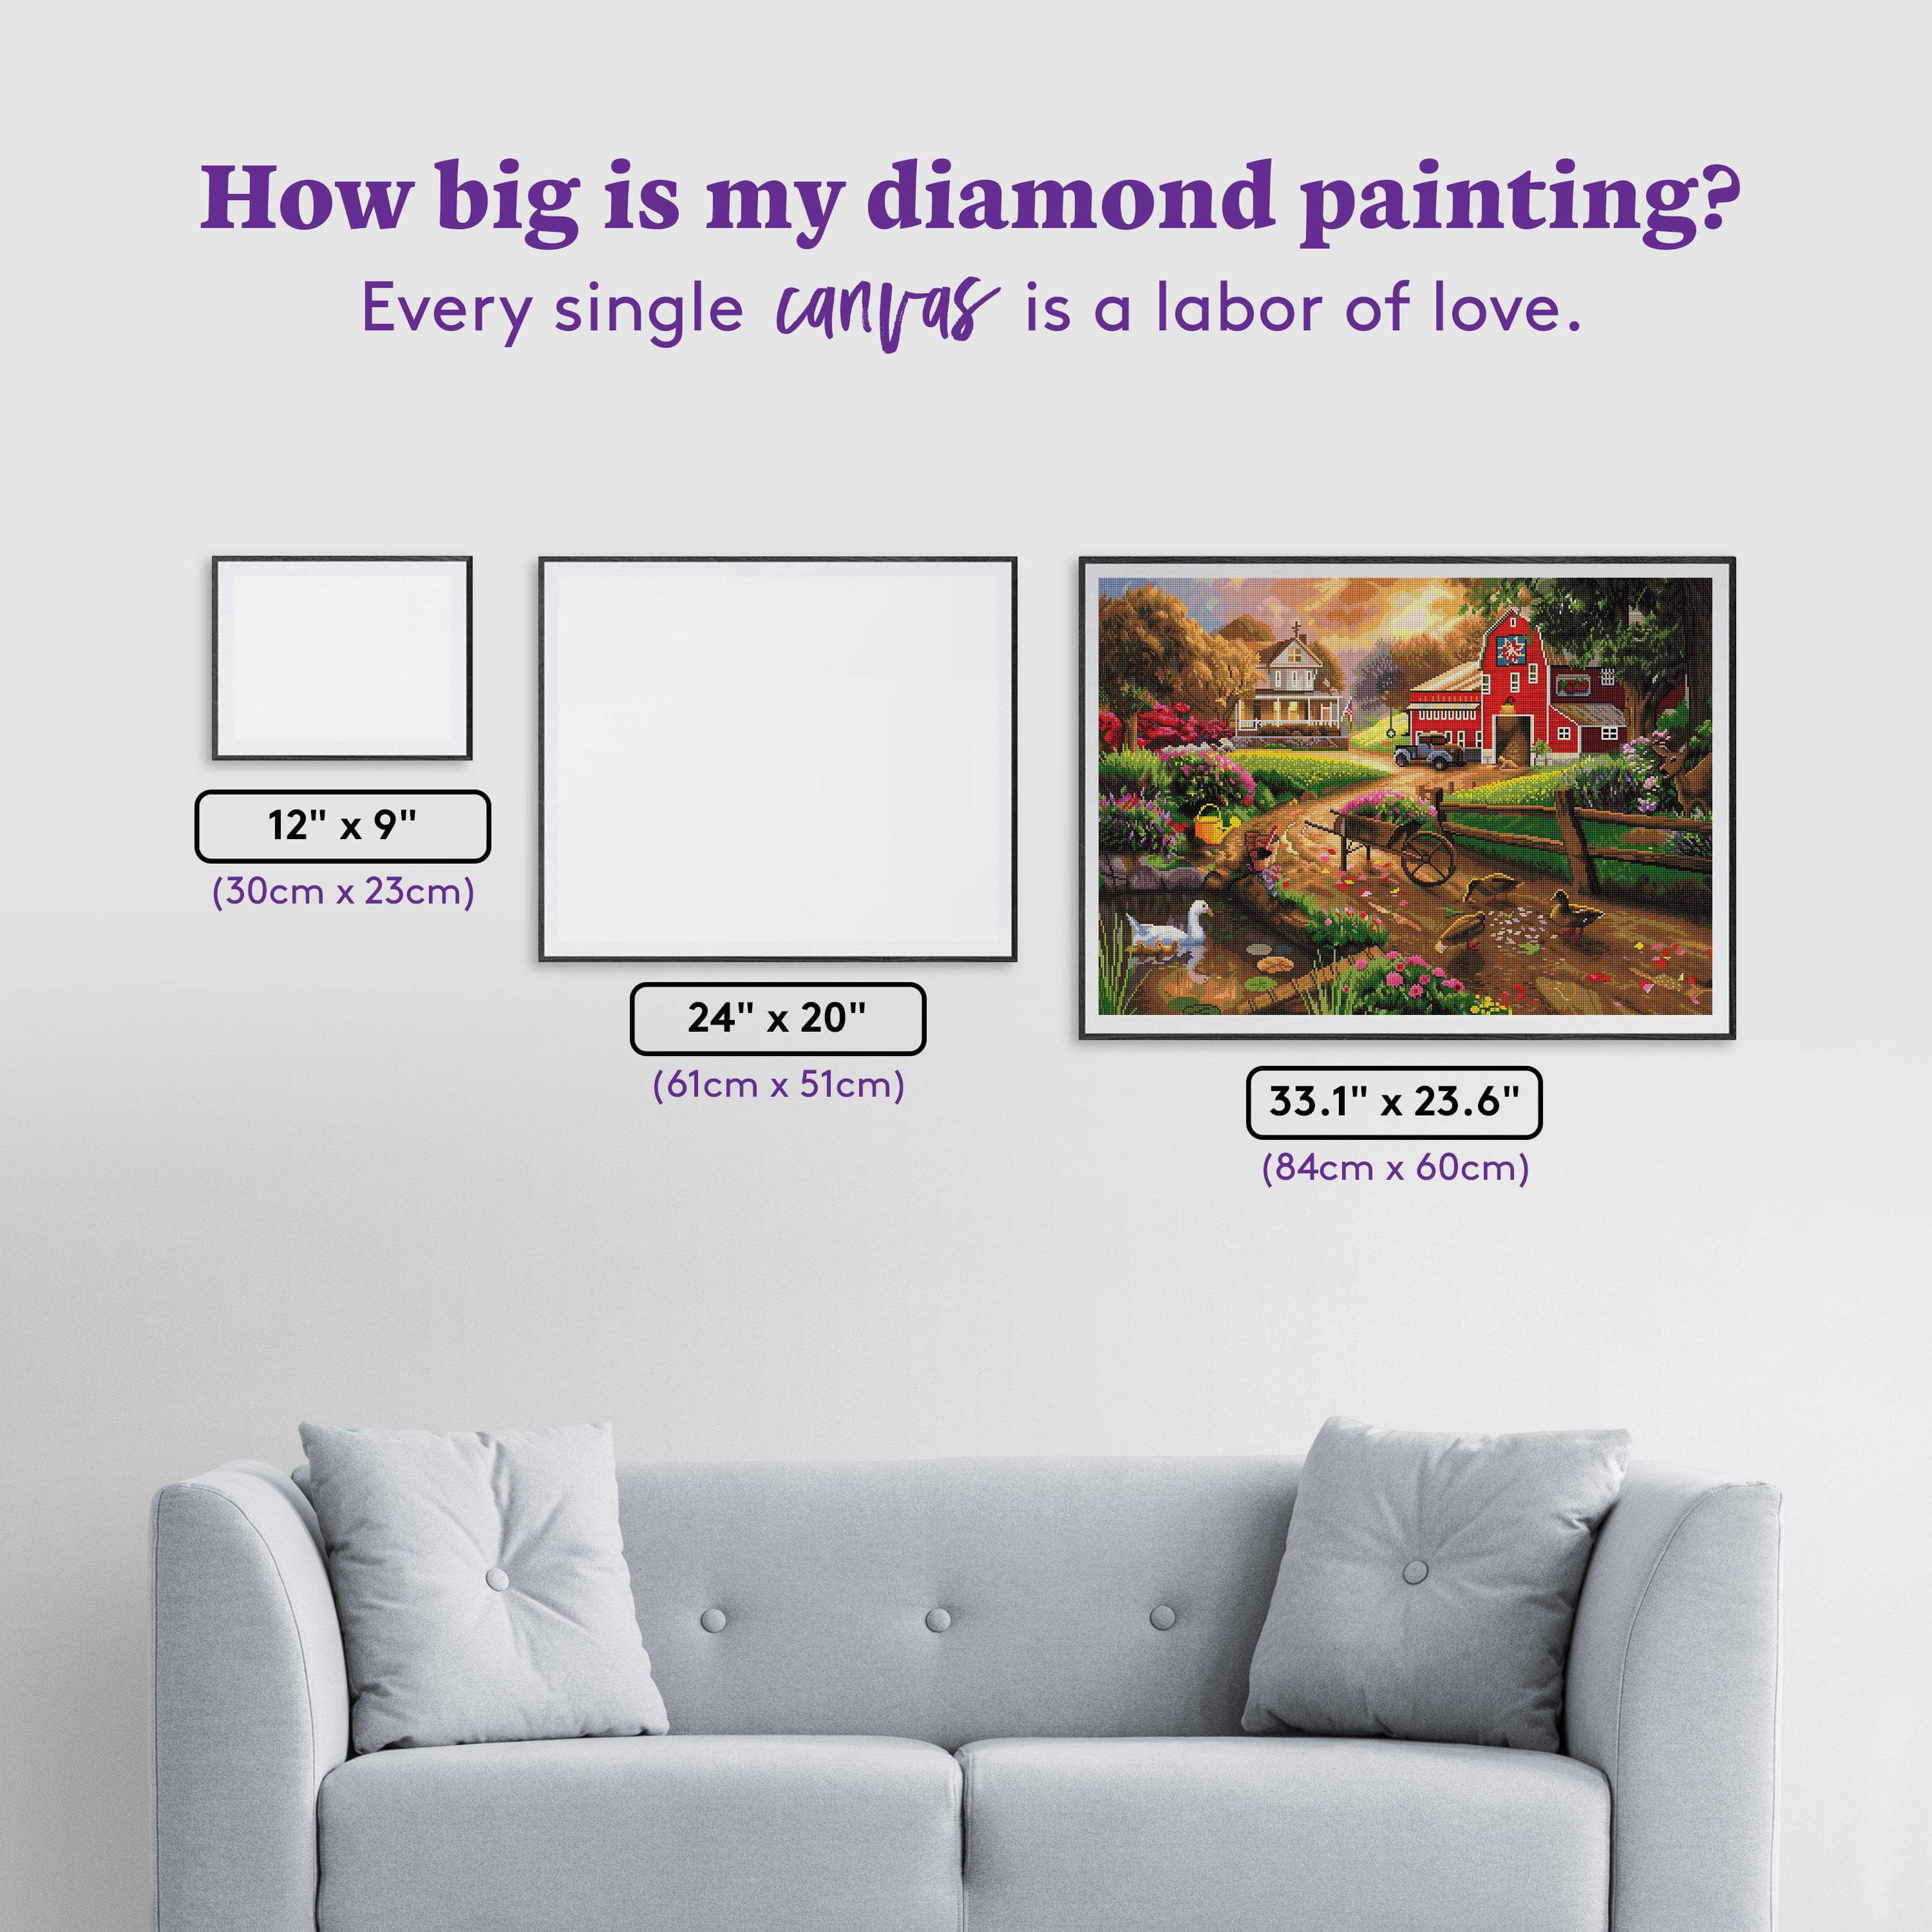 Together In Harmony Diamond Painting Kit (Full Drill)